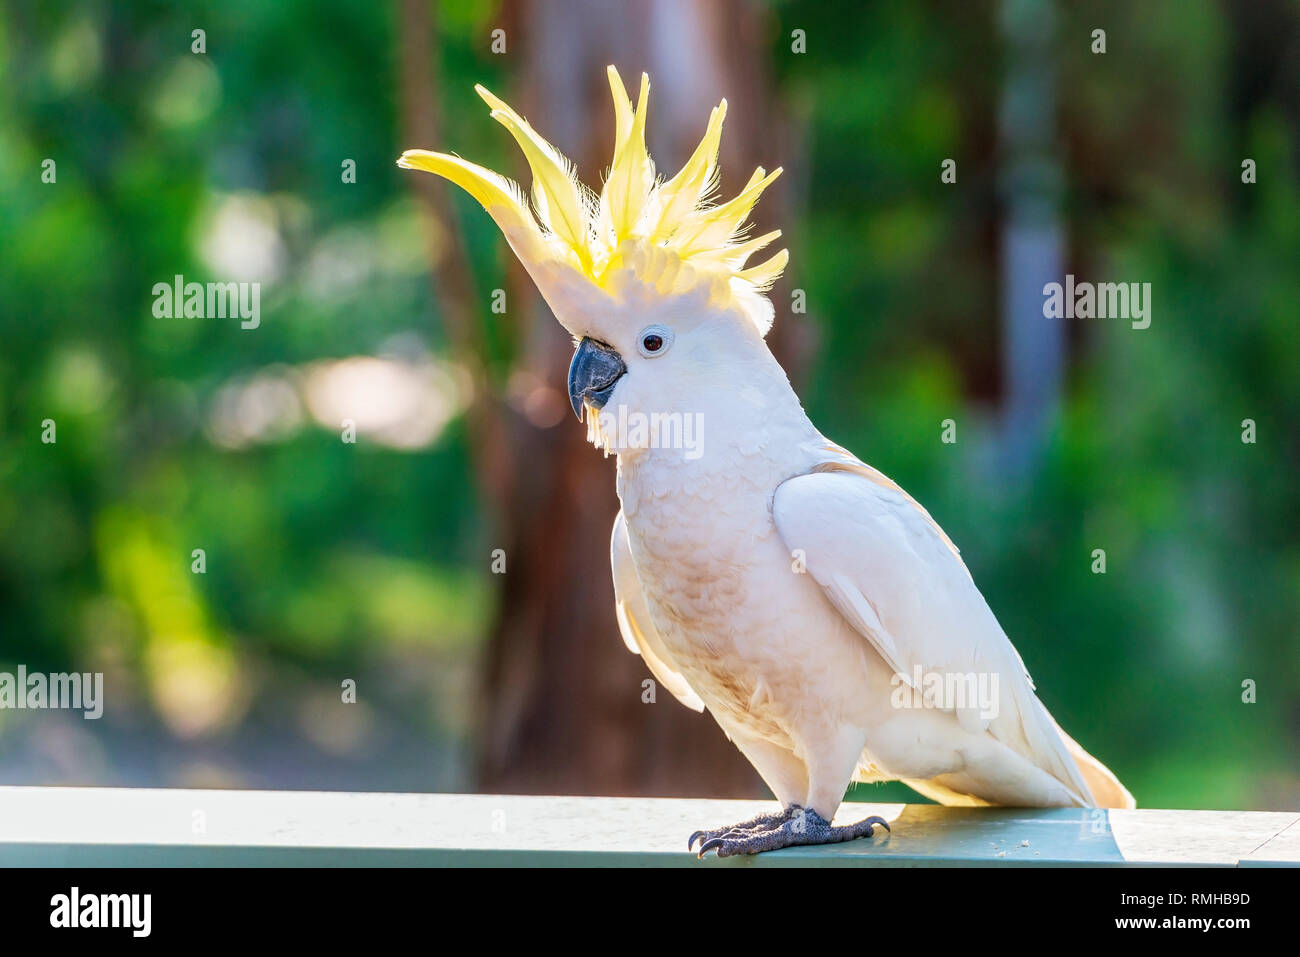 Yellow-crested cockatoo bird flaring the crest Stock Photo